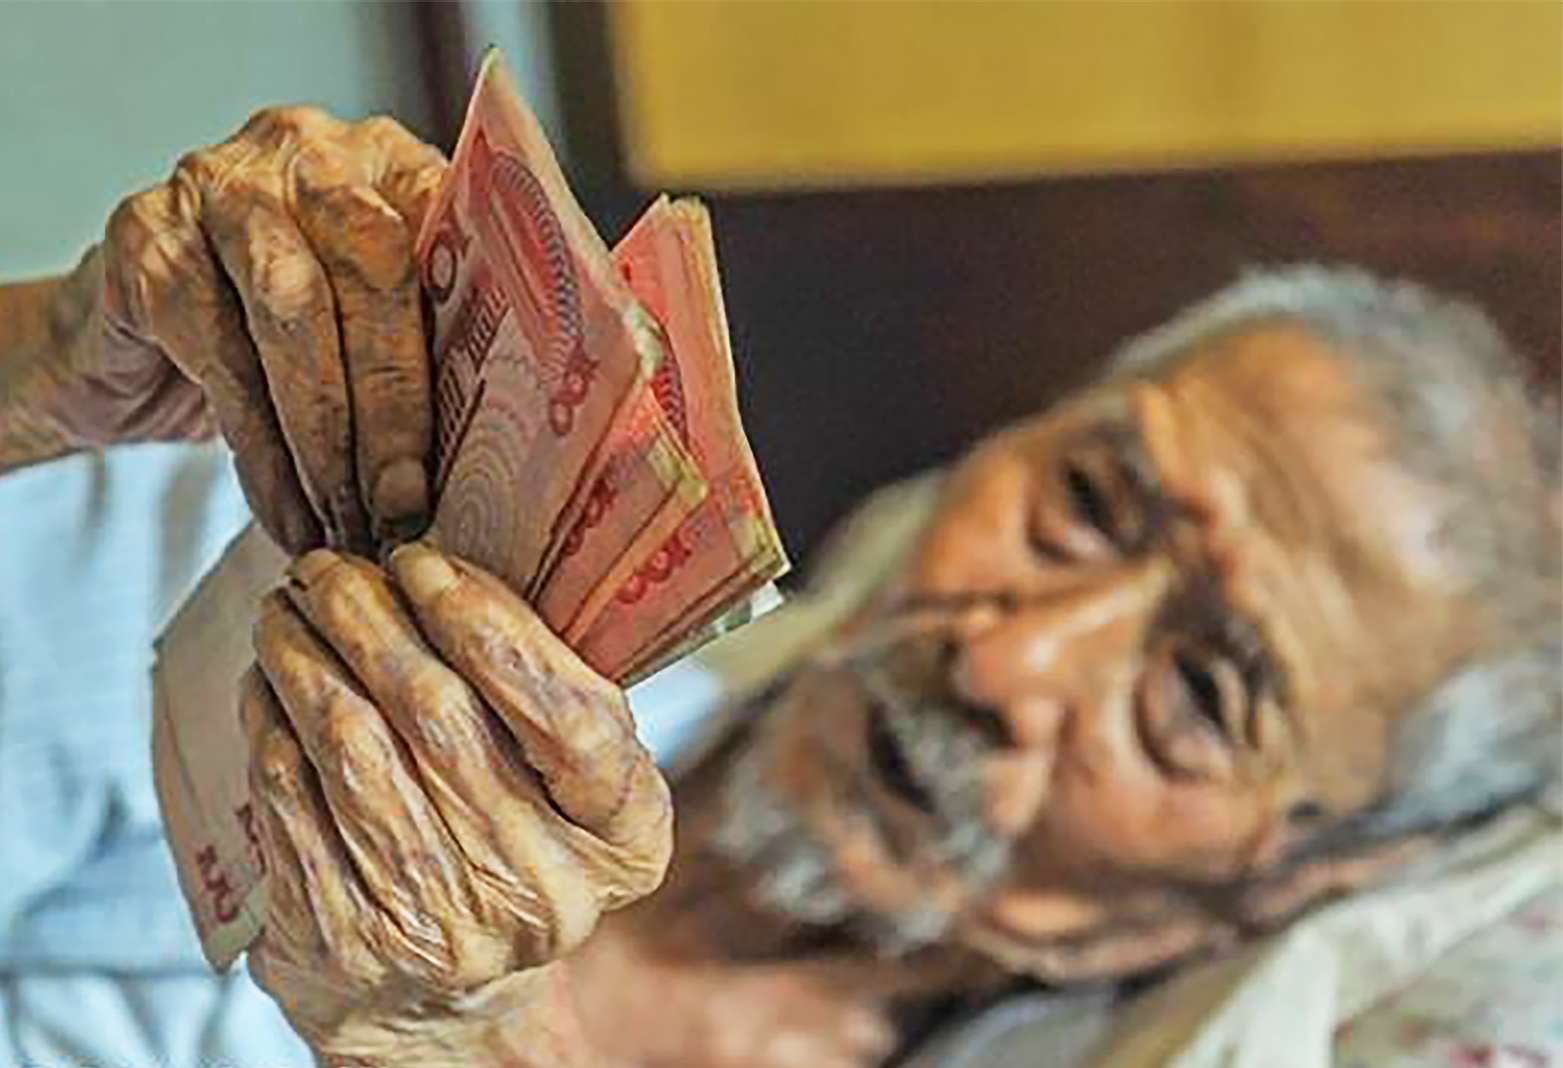 Former bank teller Lin Yongqing, 103, who spends most of his time in bed at his home in Sichuan province, still enjoys counting money every day. Photo: SCMP Pictures